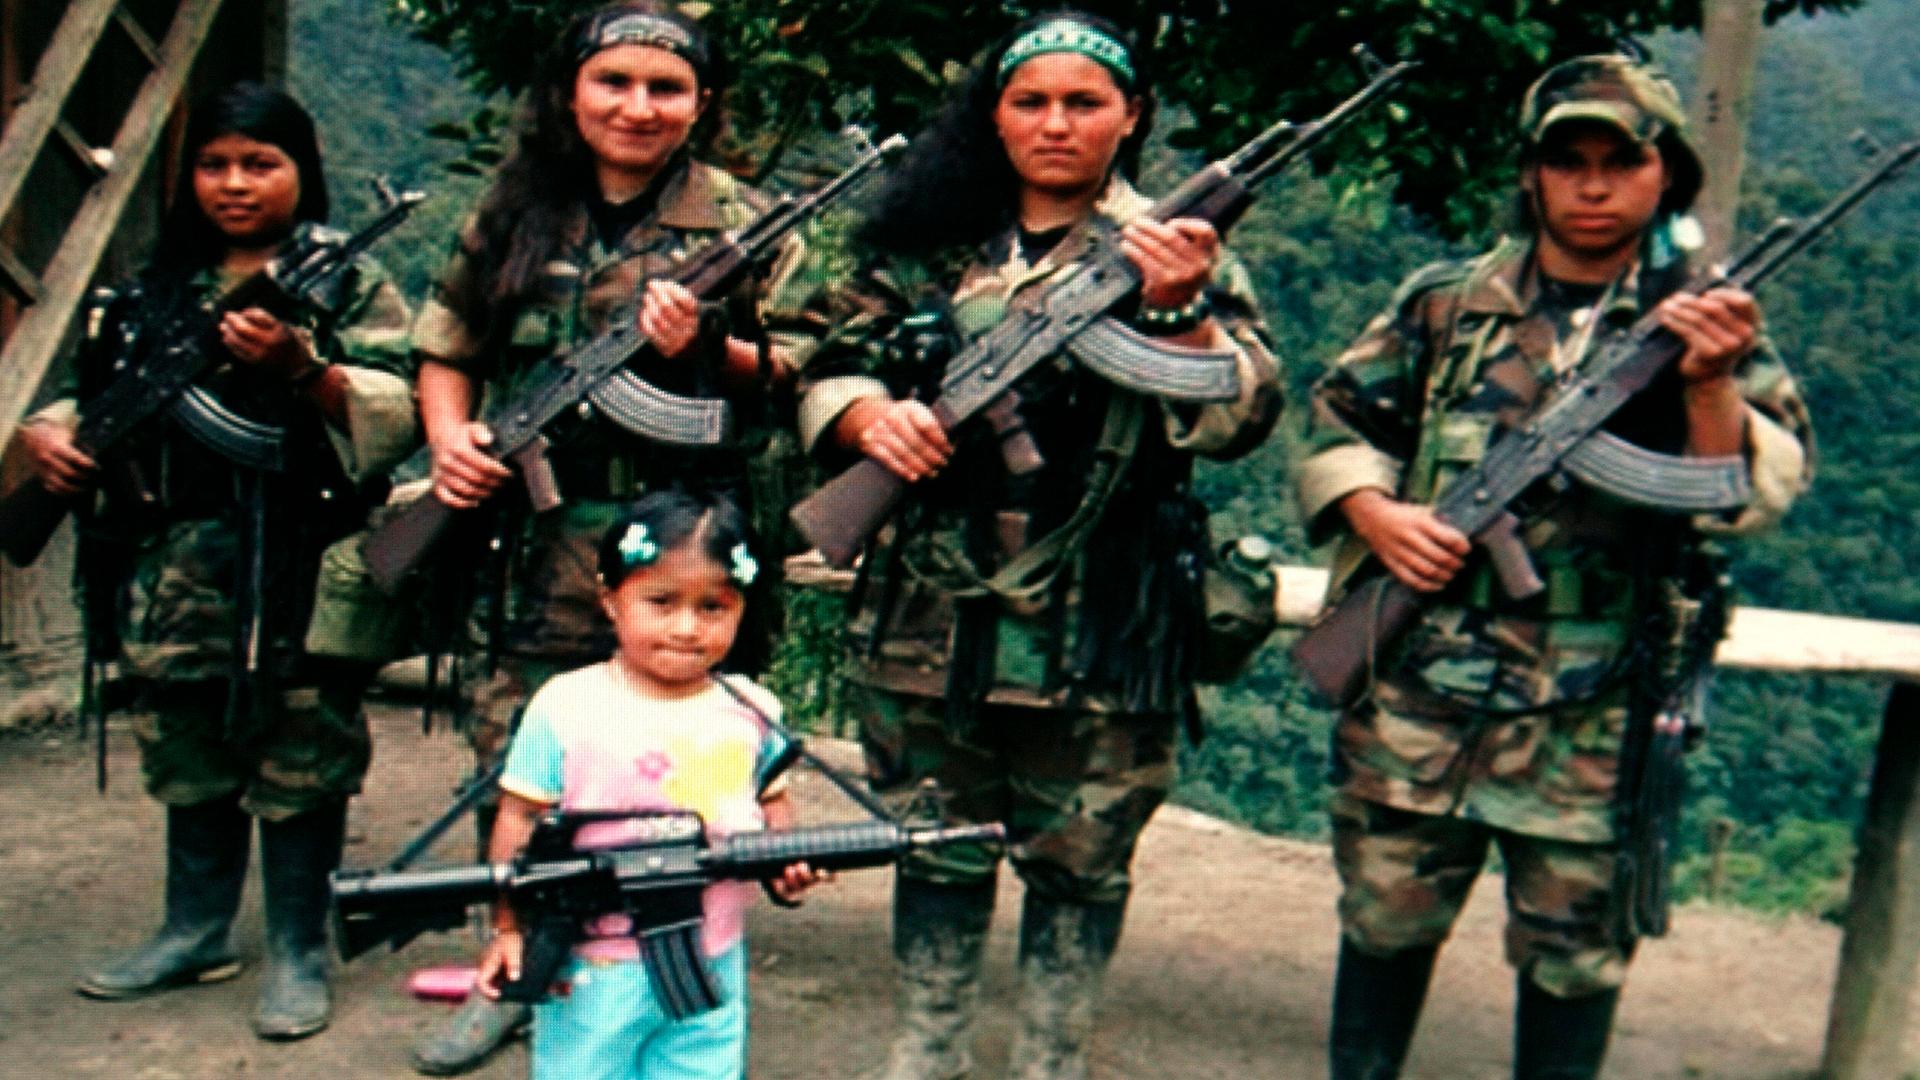 FARC rebels pose with an unidentified girl holding a weapon in southern Colombia in this undated photo confiscated by the Colombian police and released to the media on November 12, 2009. Police said that the photo was found on the body of a rebel FARC kil